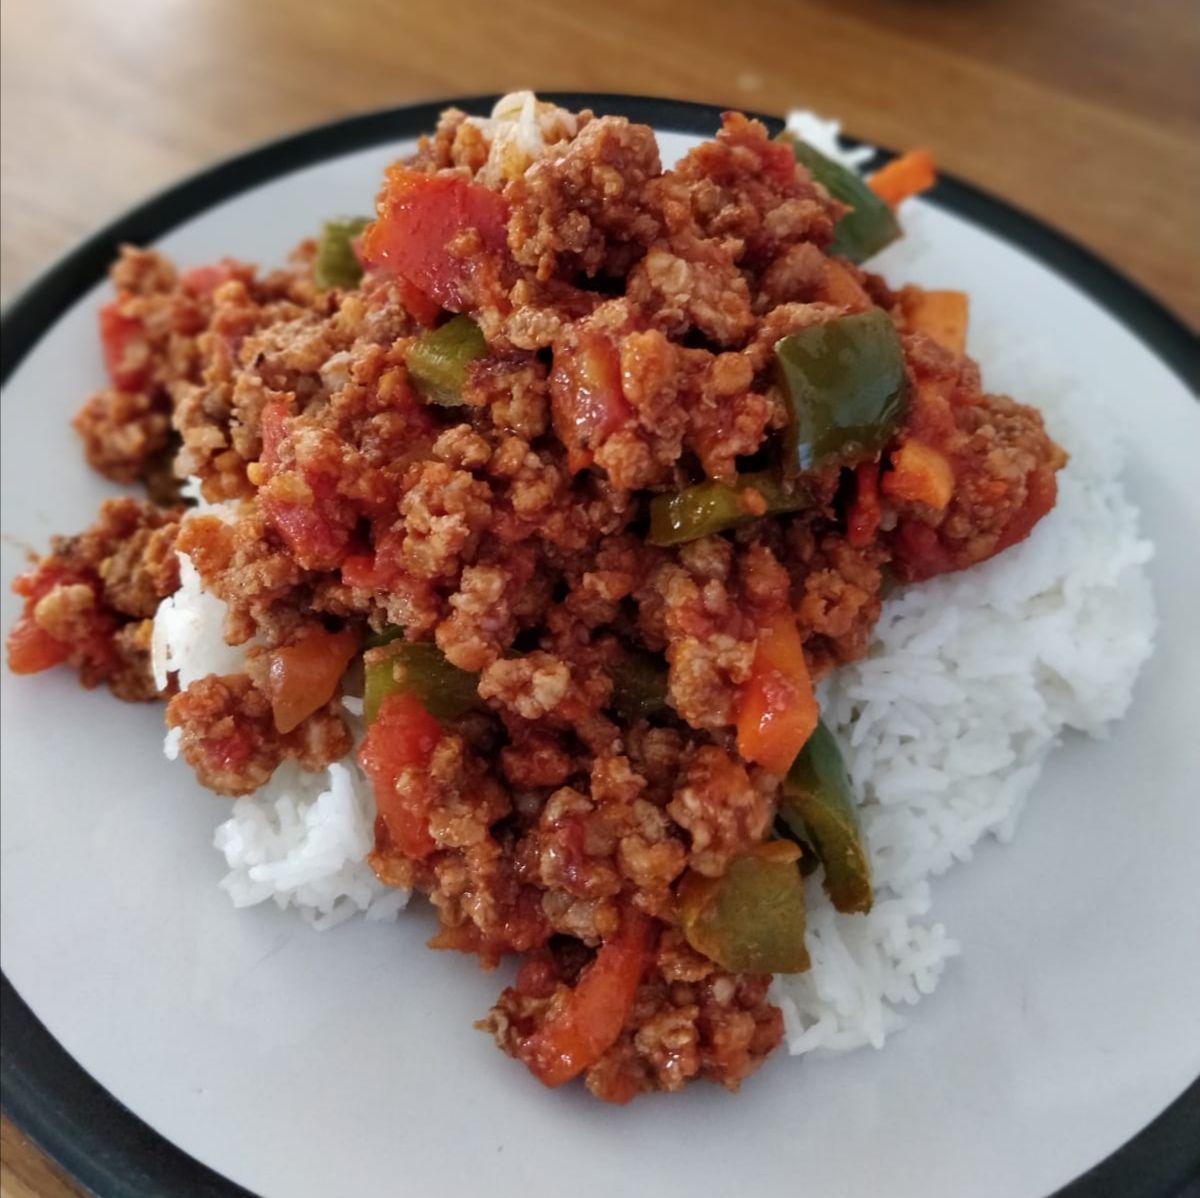 Morrocan mince dish with rice